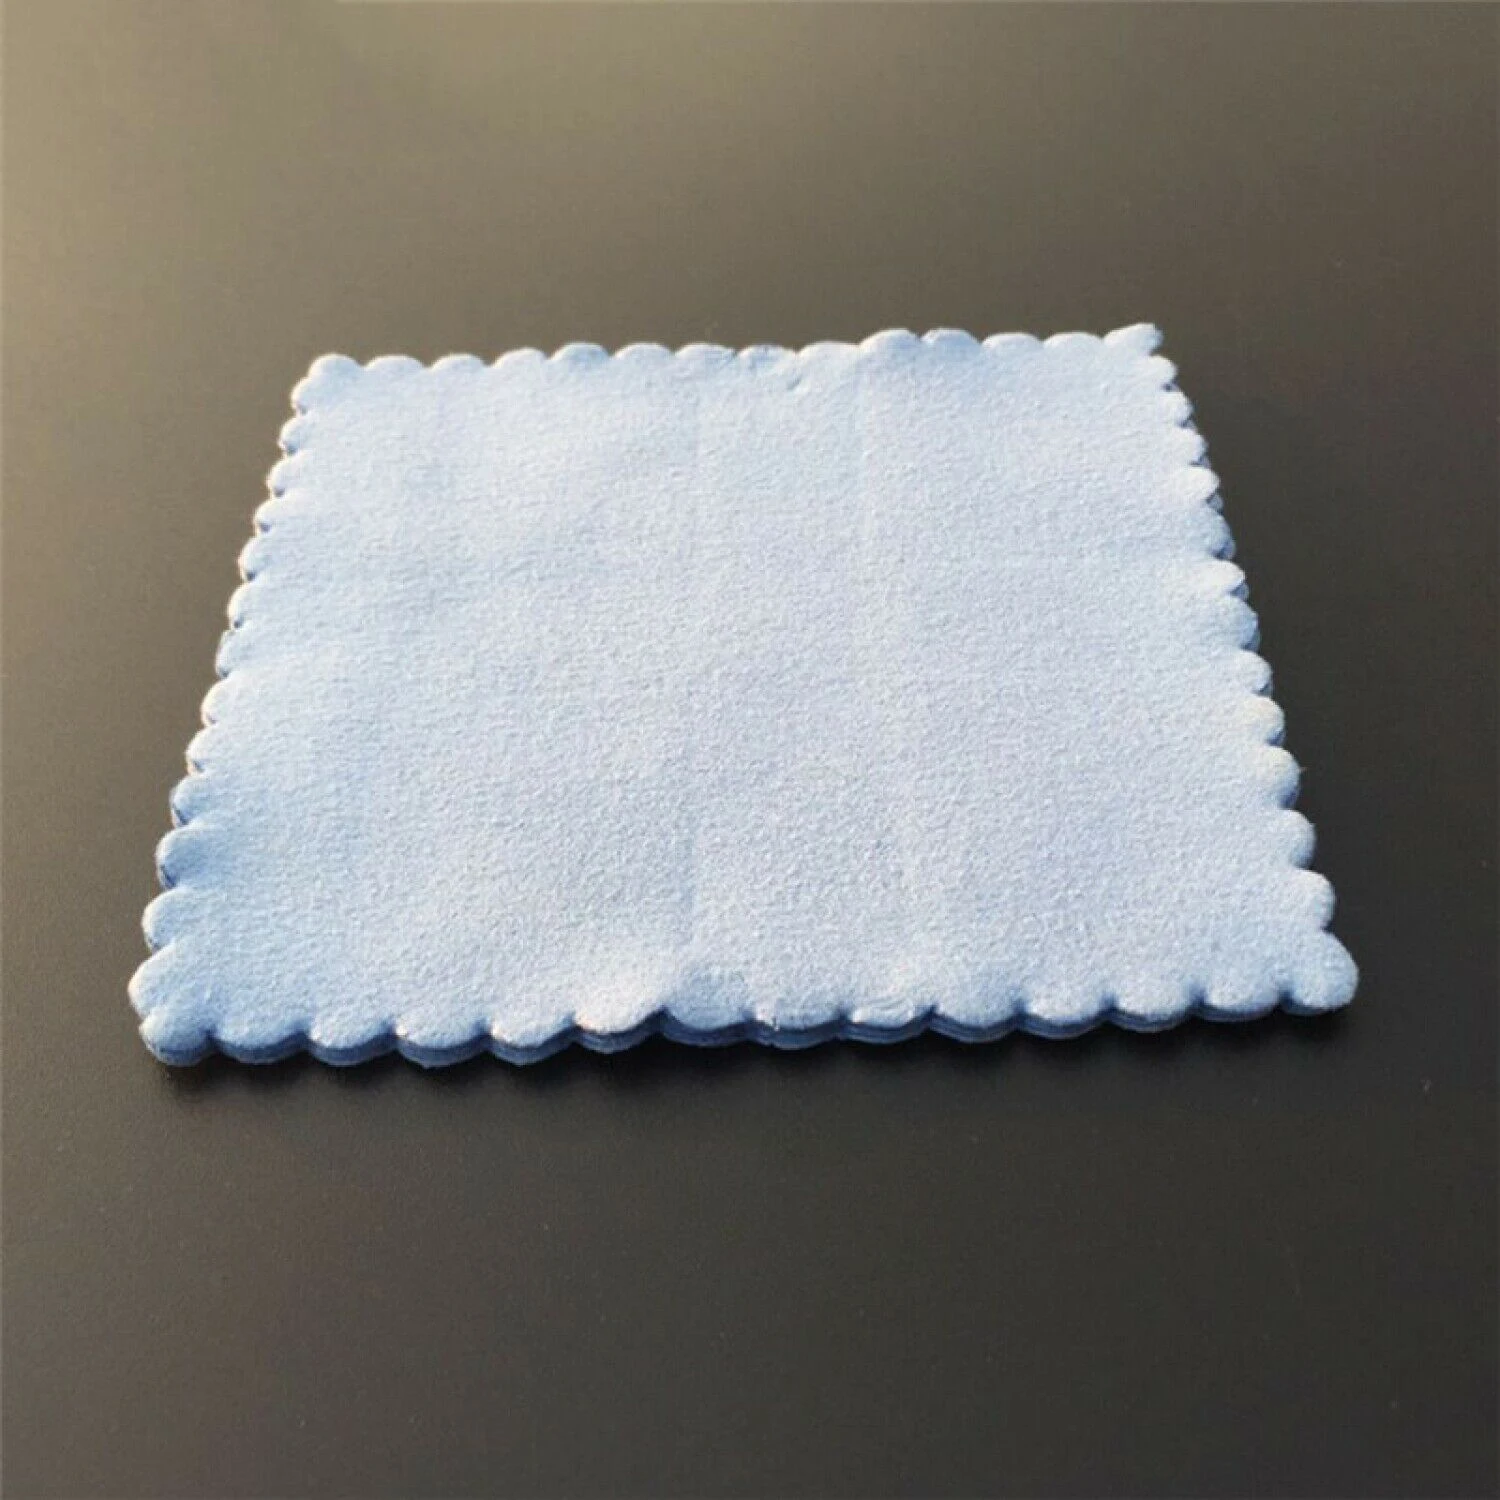 

20Pcs High Quality Nano Ceramic Car Cleaning Cloths Auto Absorbent Microfiber Wiping Rags Wash Towels Car Cleaning Drying Clot